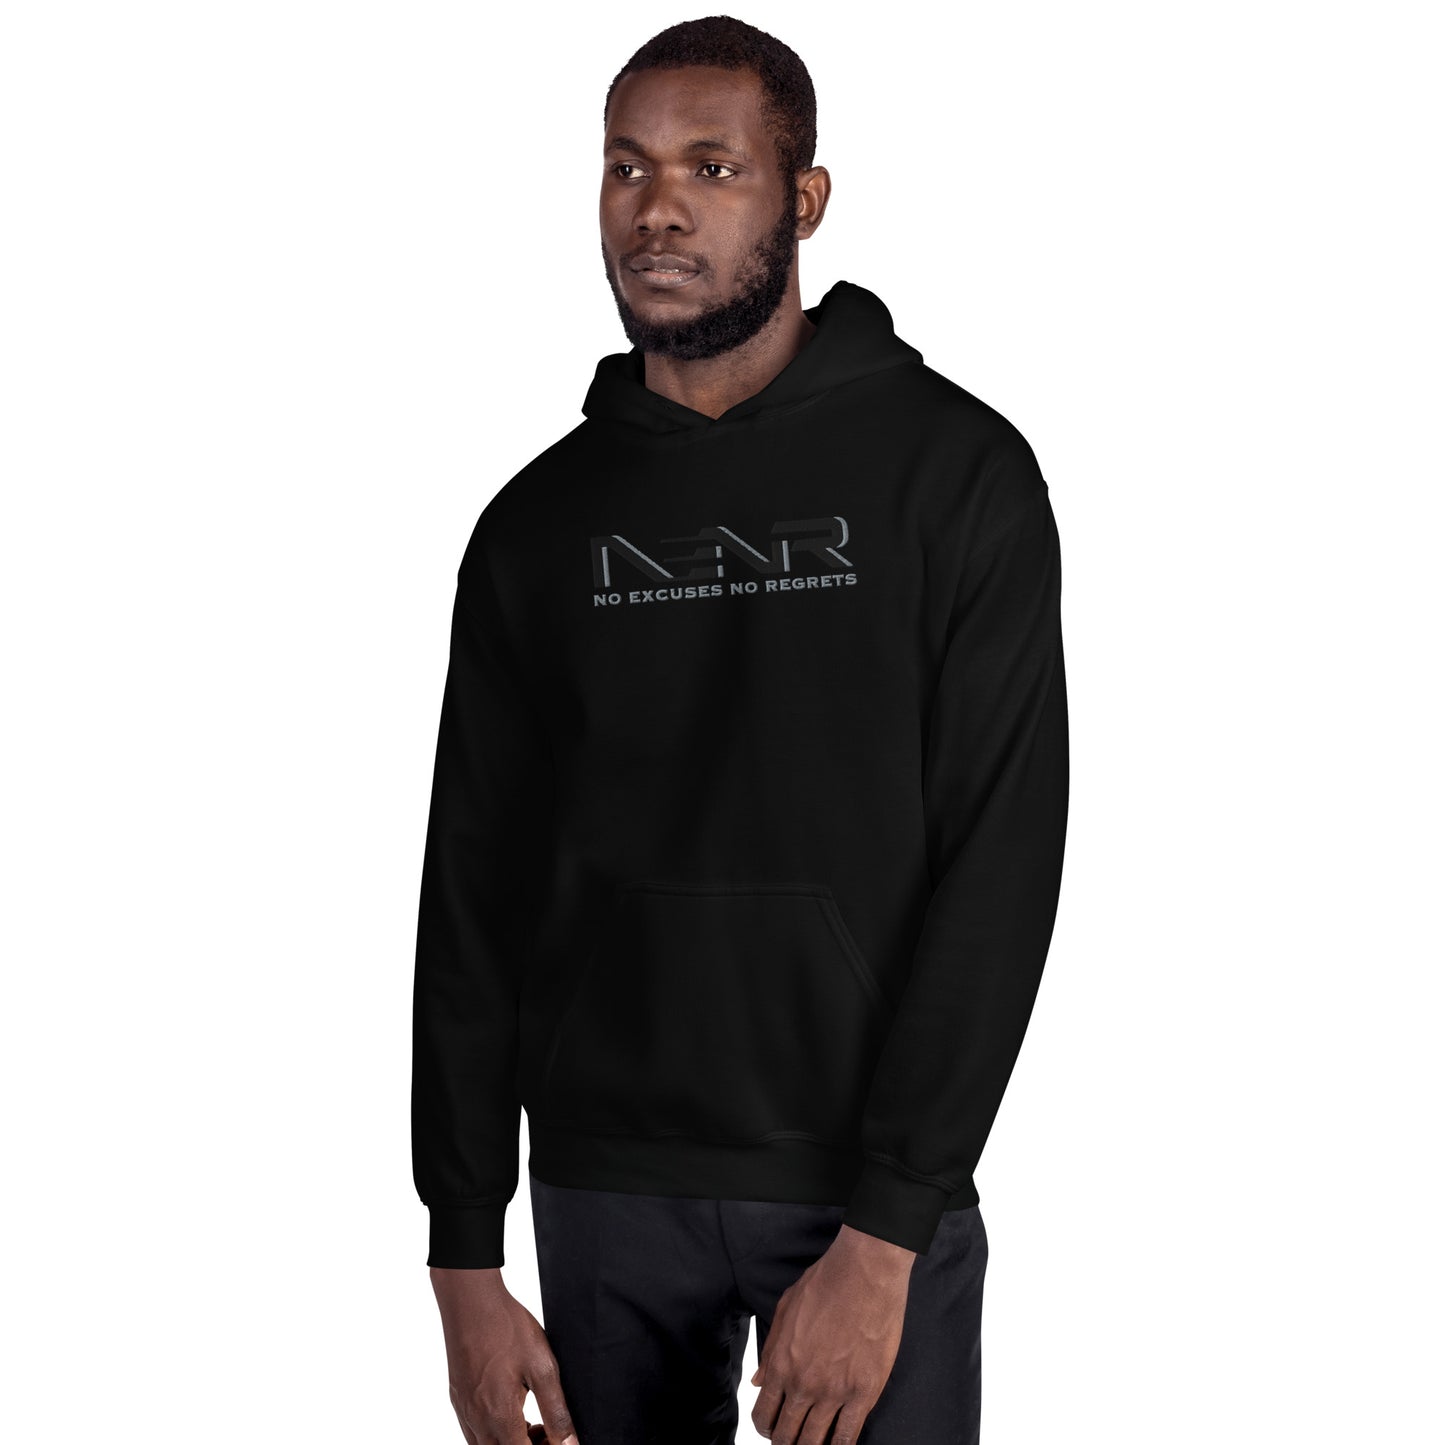 NO EXCUSES NO REGRETS ~ EMBROIDERED HOODIE